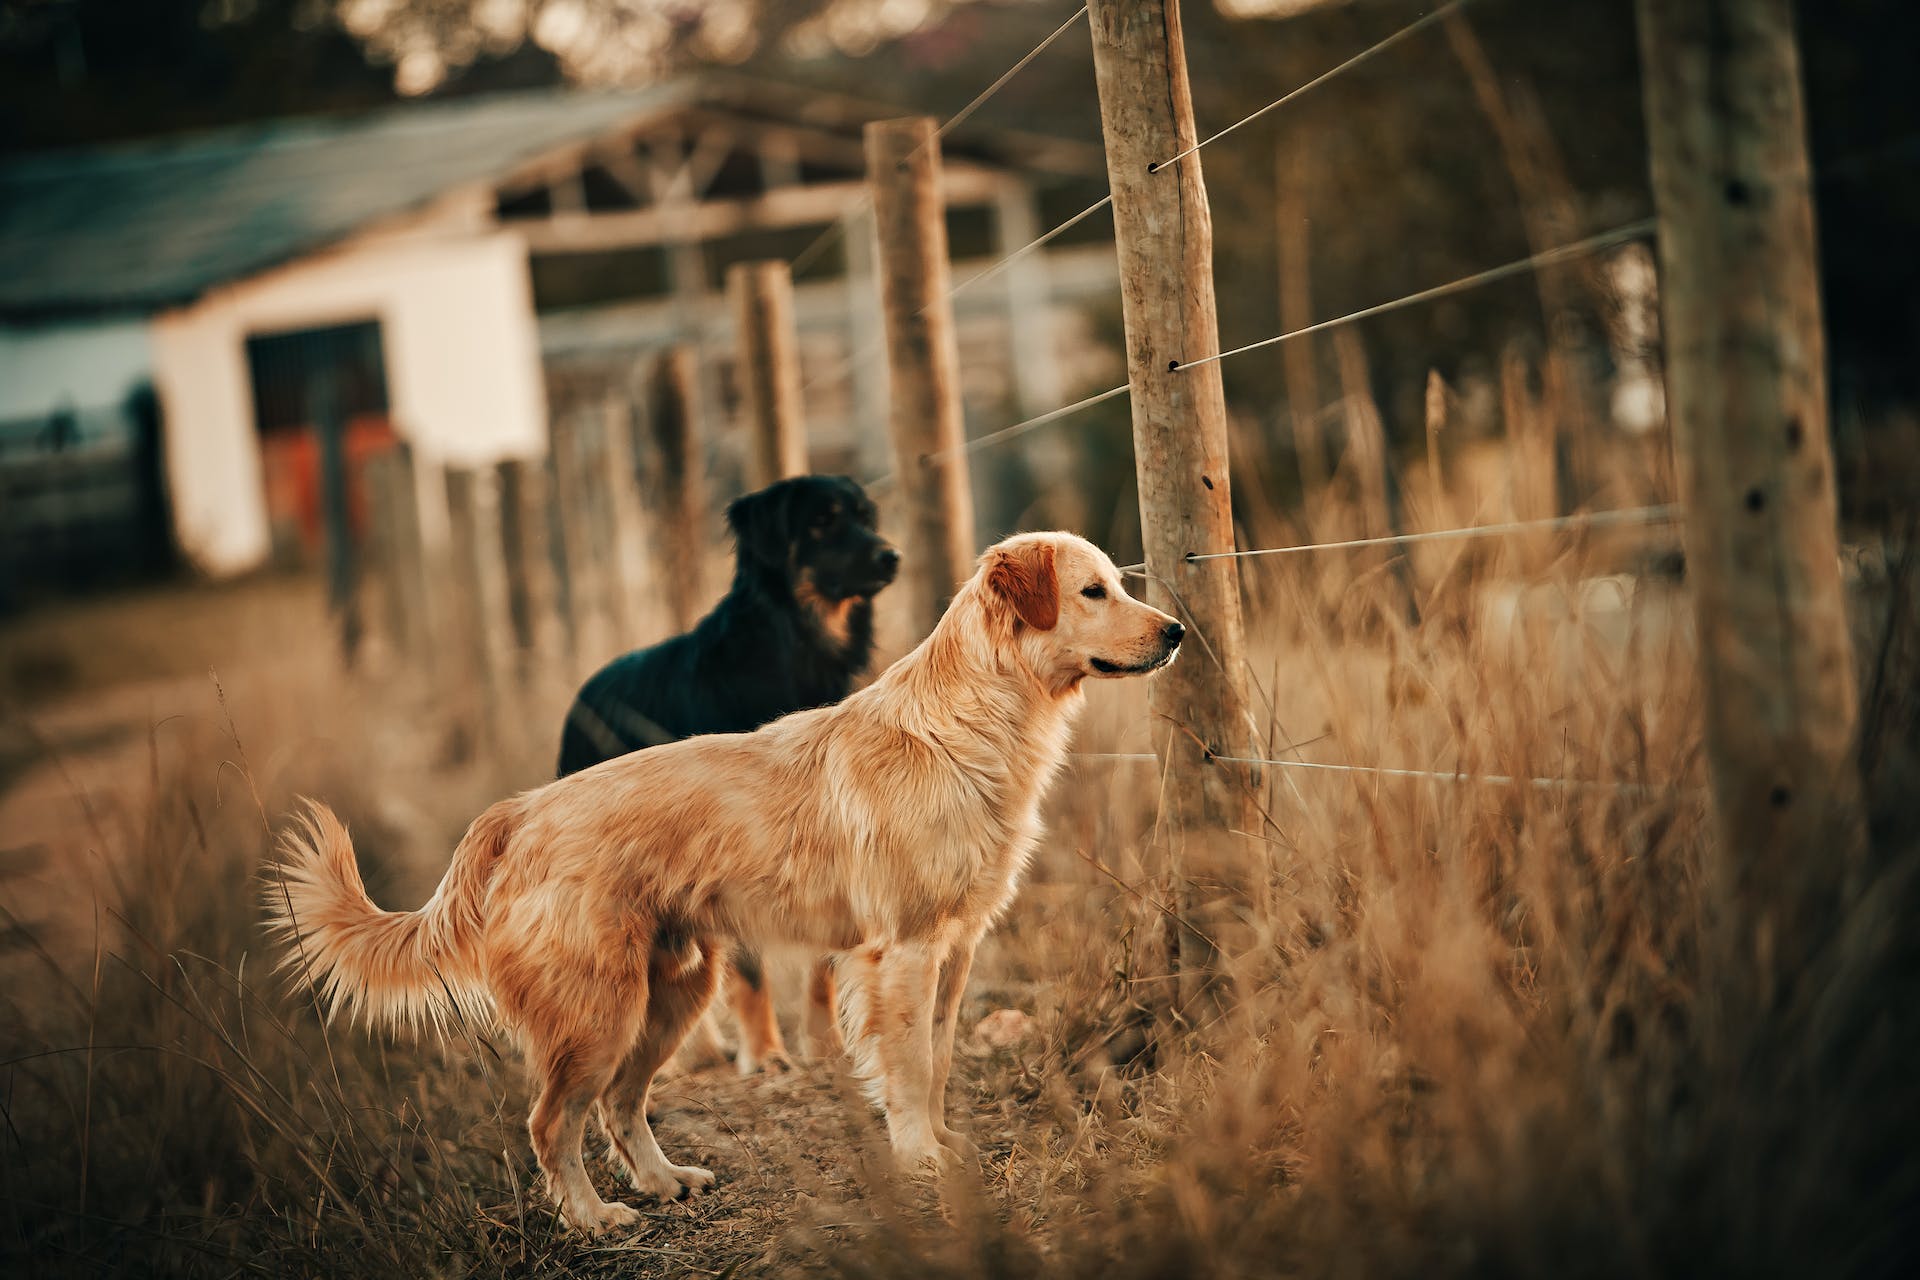 A pair of dogs standing by a wooden fence in a field